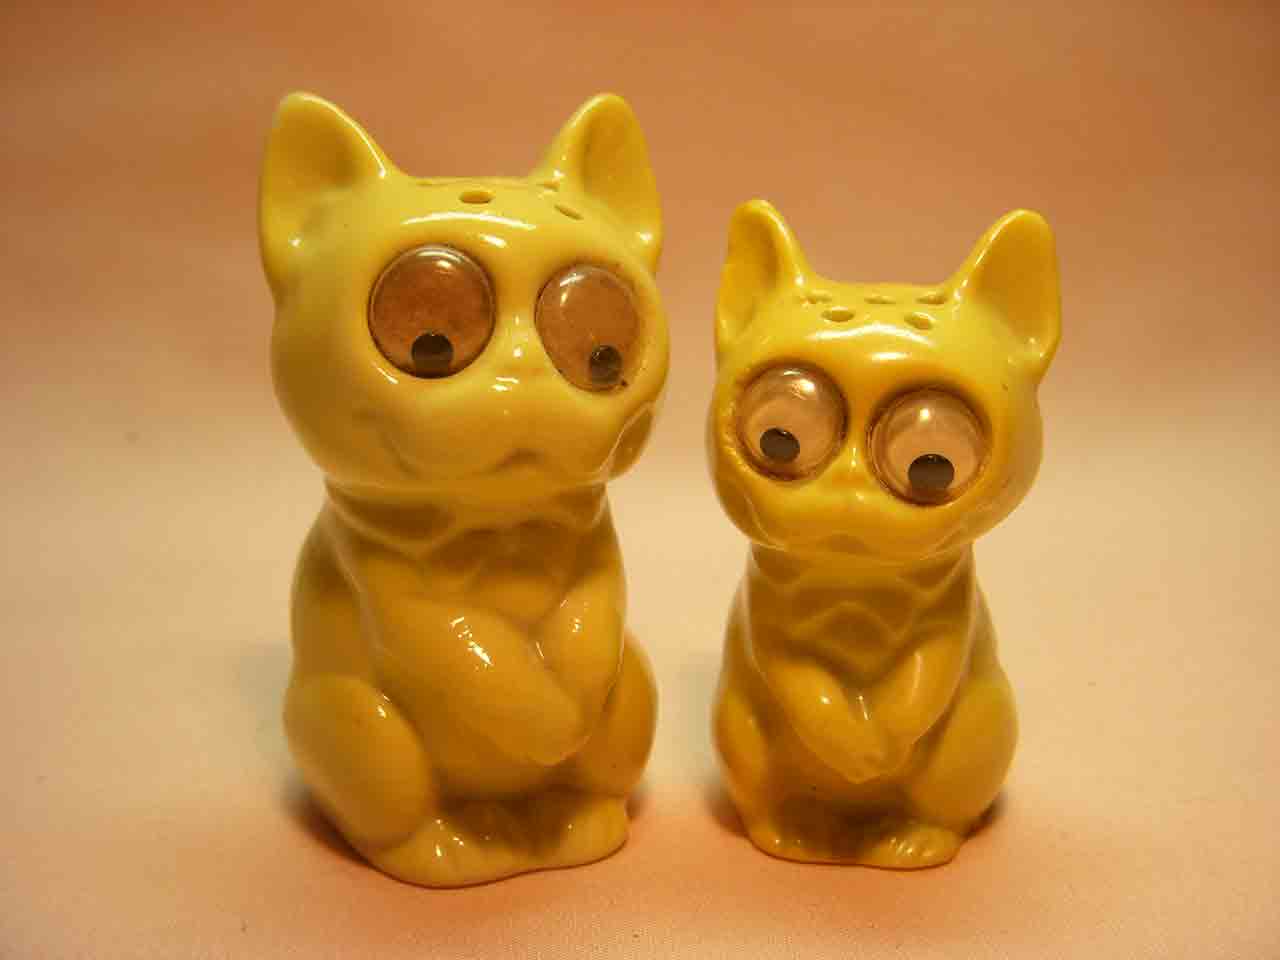 Germany google-eyed animal salt and pepper shakers - cats